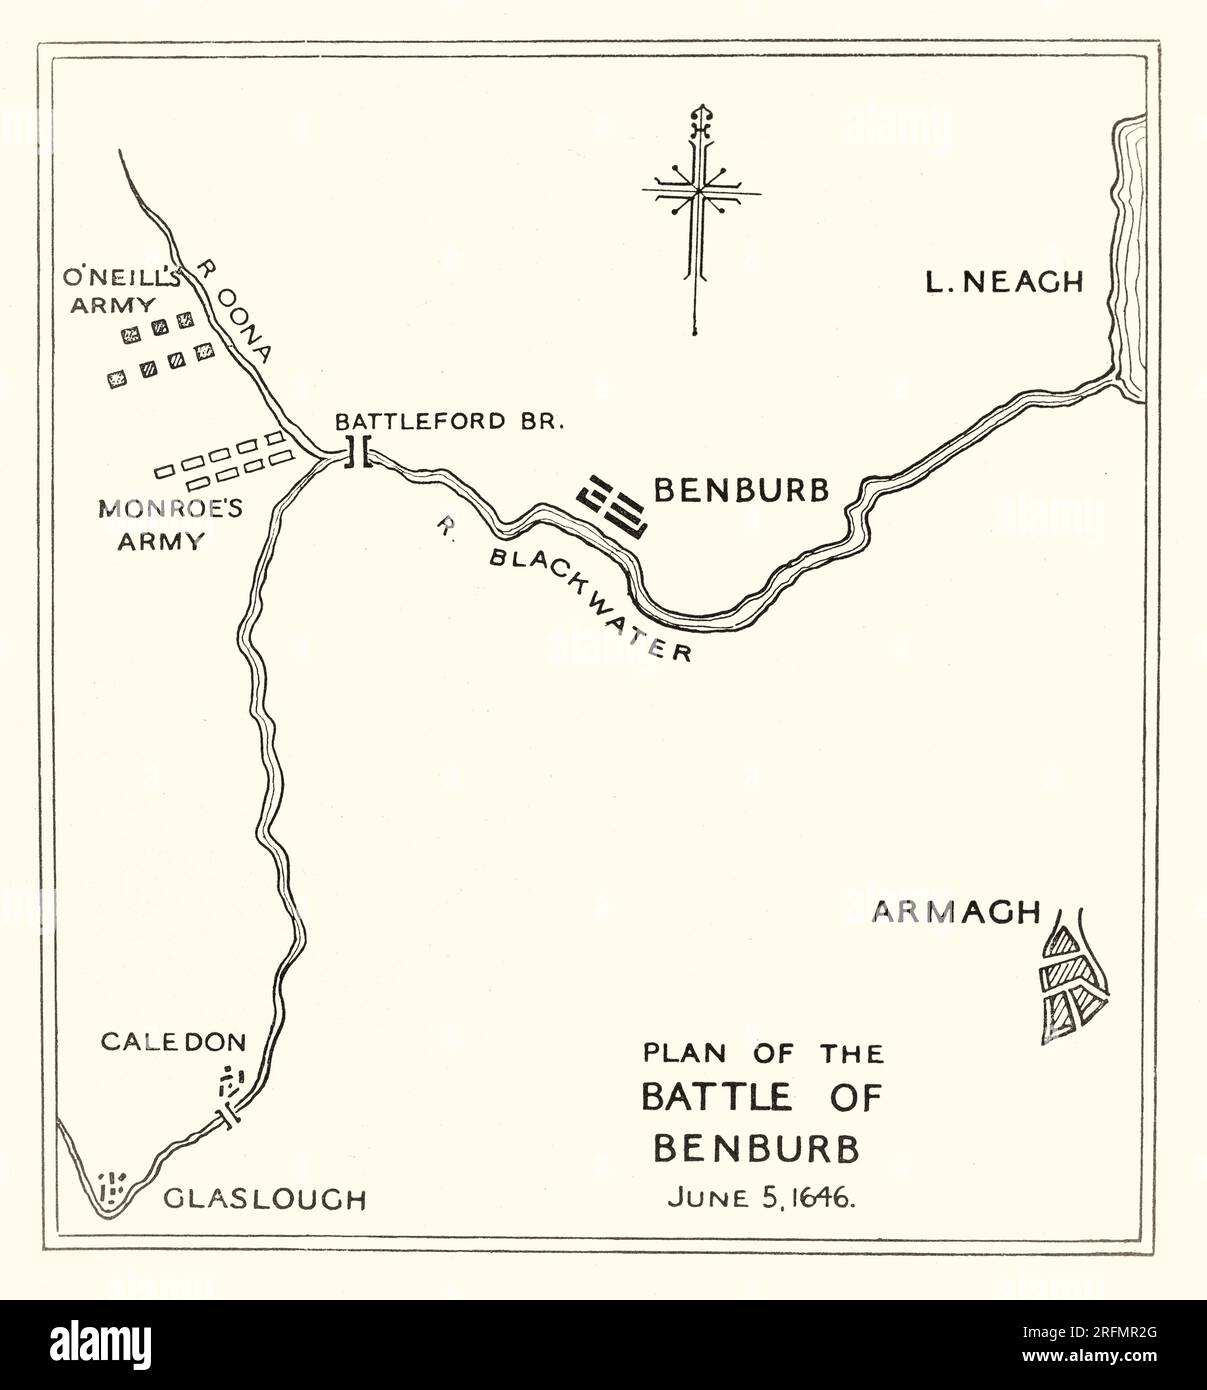 A 17th century plan of the Battle of Benburb, that took place  in County Tyrone, Northern Ireland, on 5 June 1646 during the Irish Confederate Wars, the Irish theatre of the Wars of the Three Kingdoms. It was fought between the Irish Confederates under Owen Roe O'Neill, and an army of Scottish Covenanters and Scottish/English settlers under Robert Monro. The battle ended in a decisive victory for the Irish Confederates and ended Scottish hopes of conquering Ireland and imposing their own religious settlement there. Stock Photo